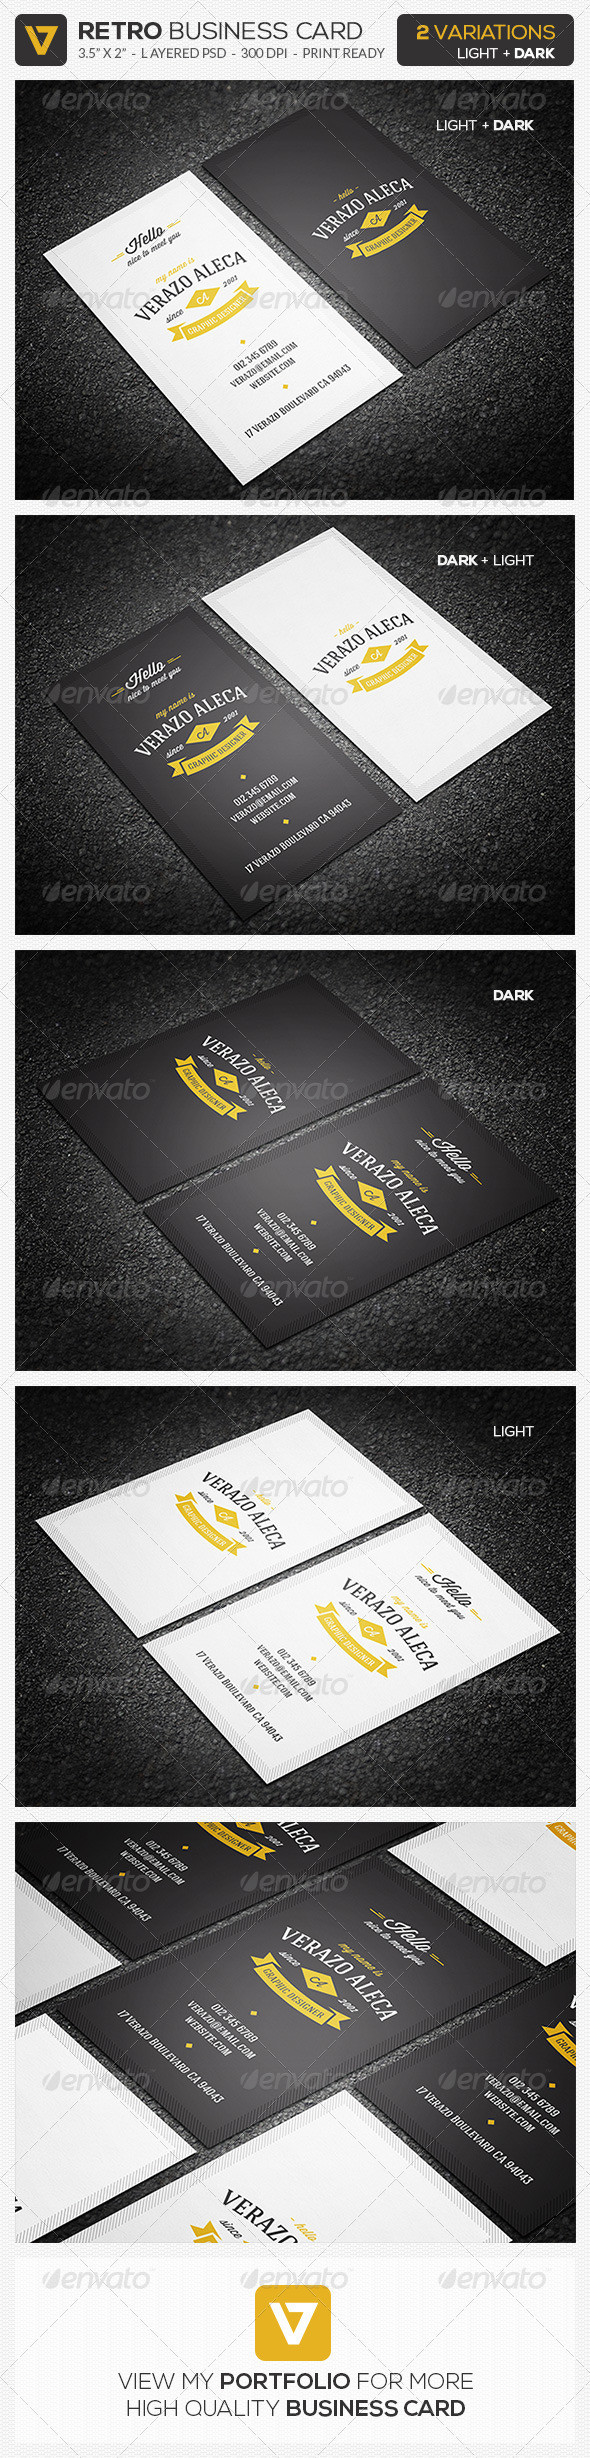 01 gold vertical retro vintage business card preview